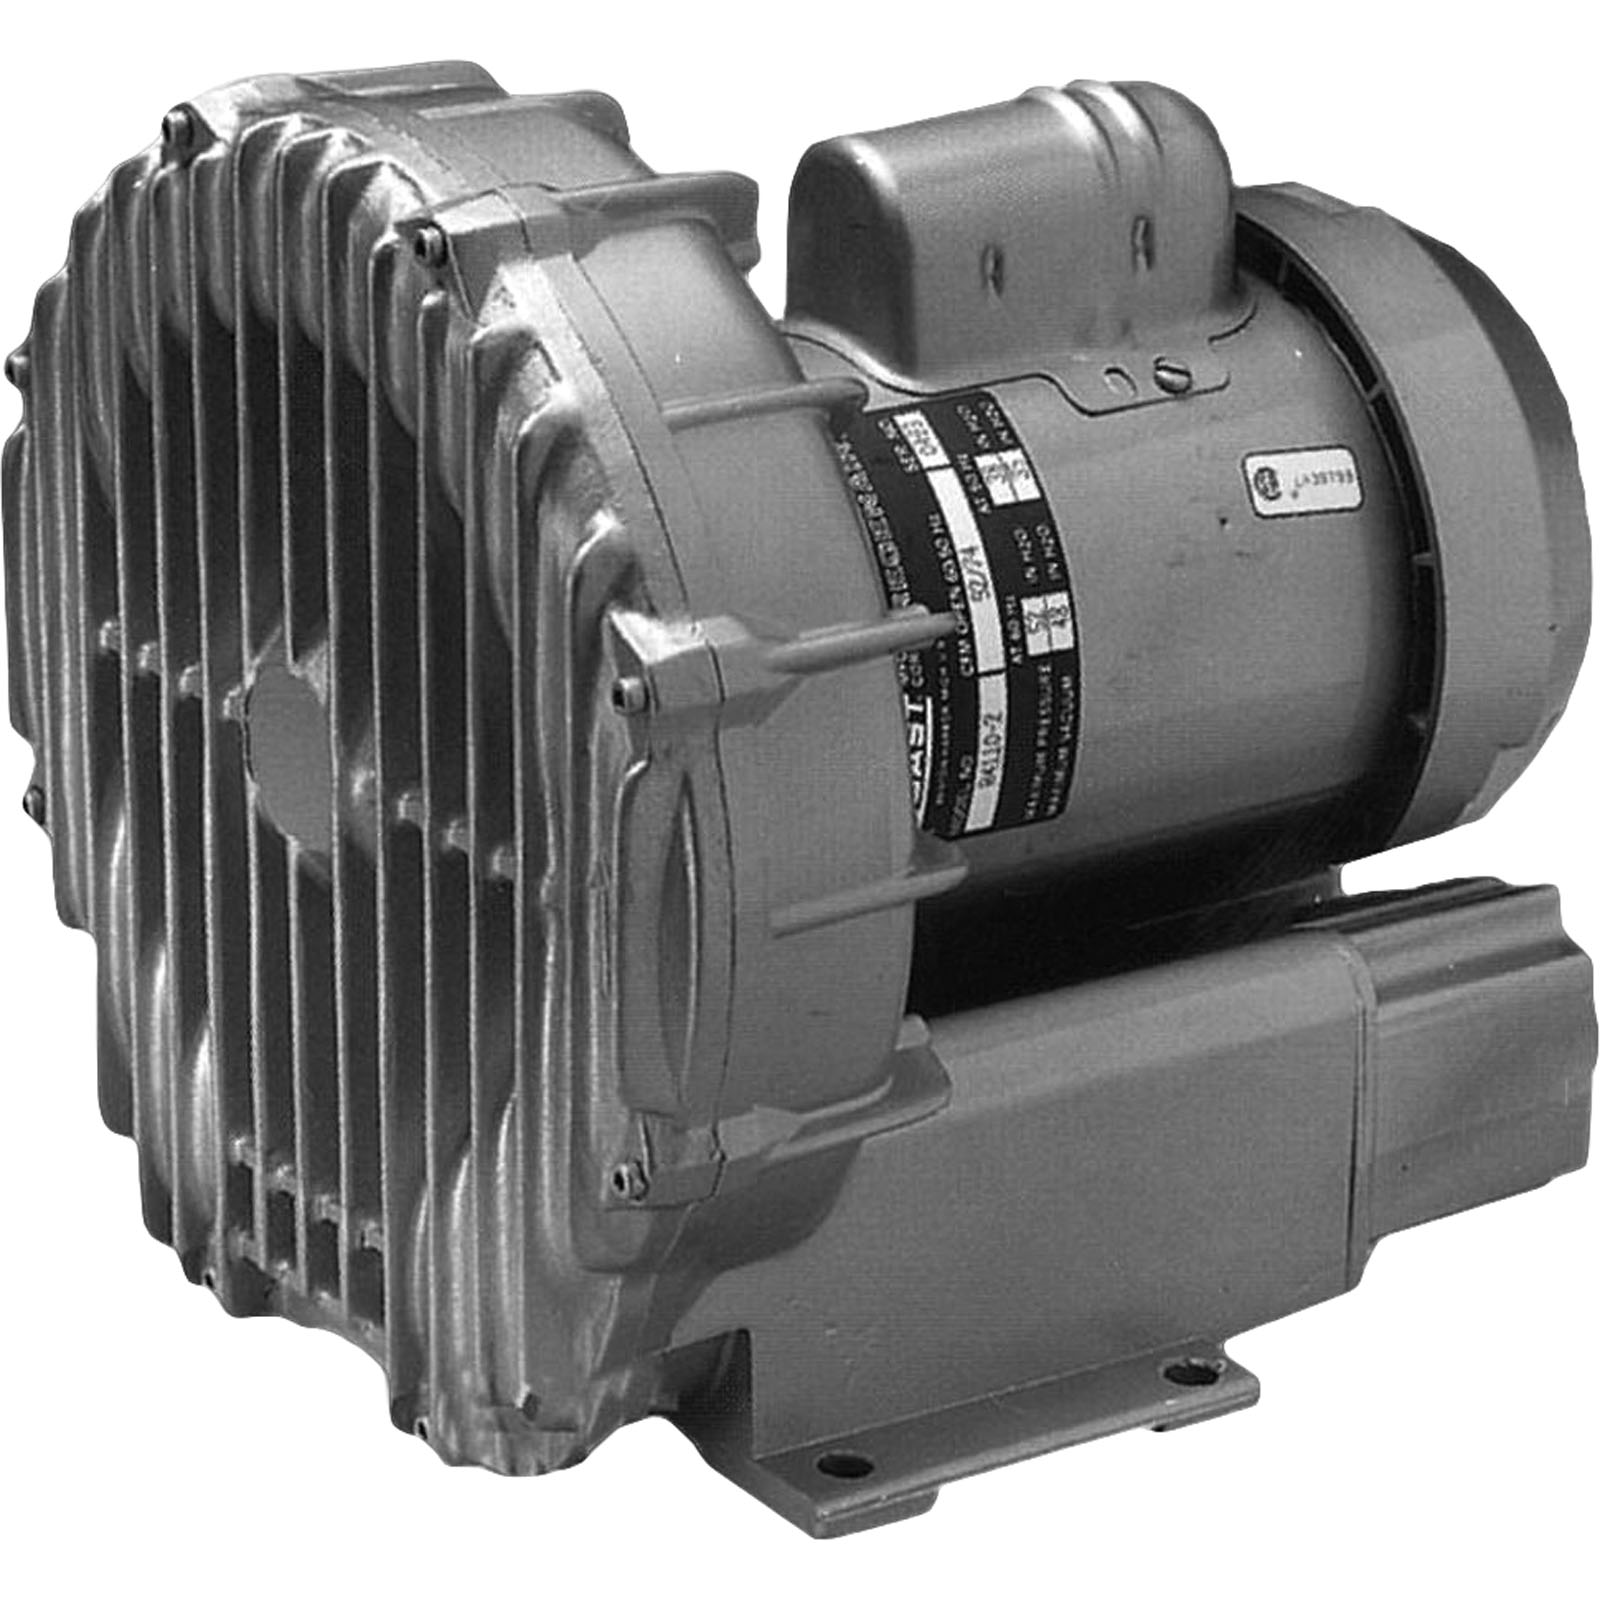 Picture of R4P115 Commercial Blower Gast 1.5hp 115v/230v Single Phase